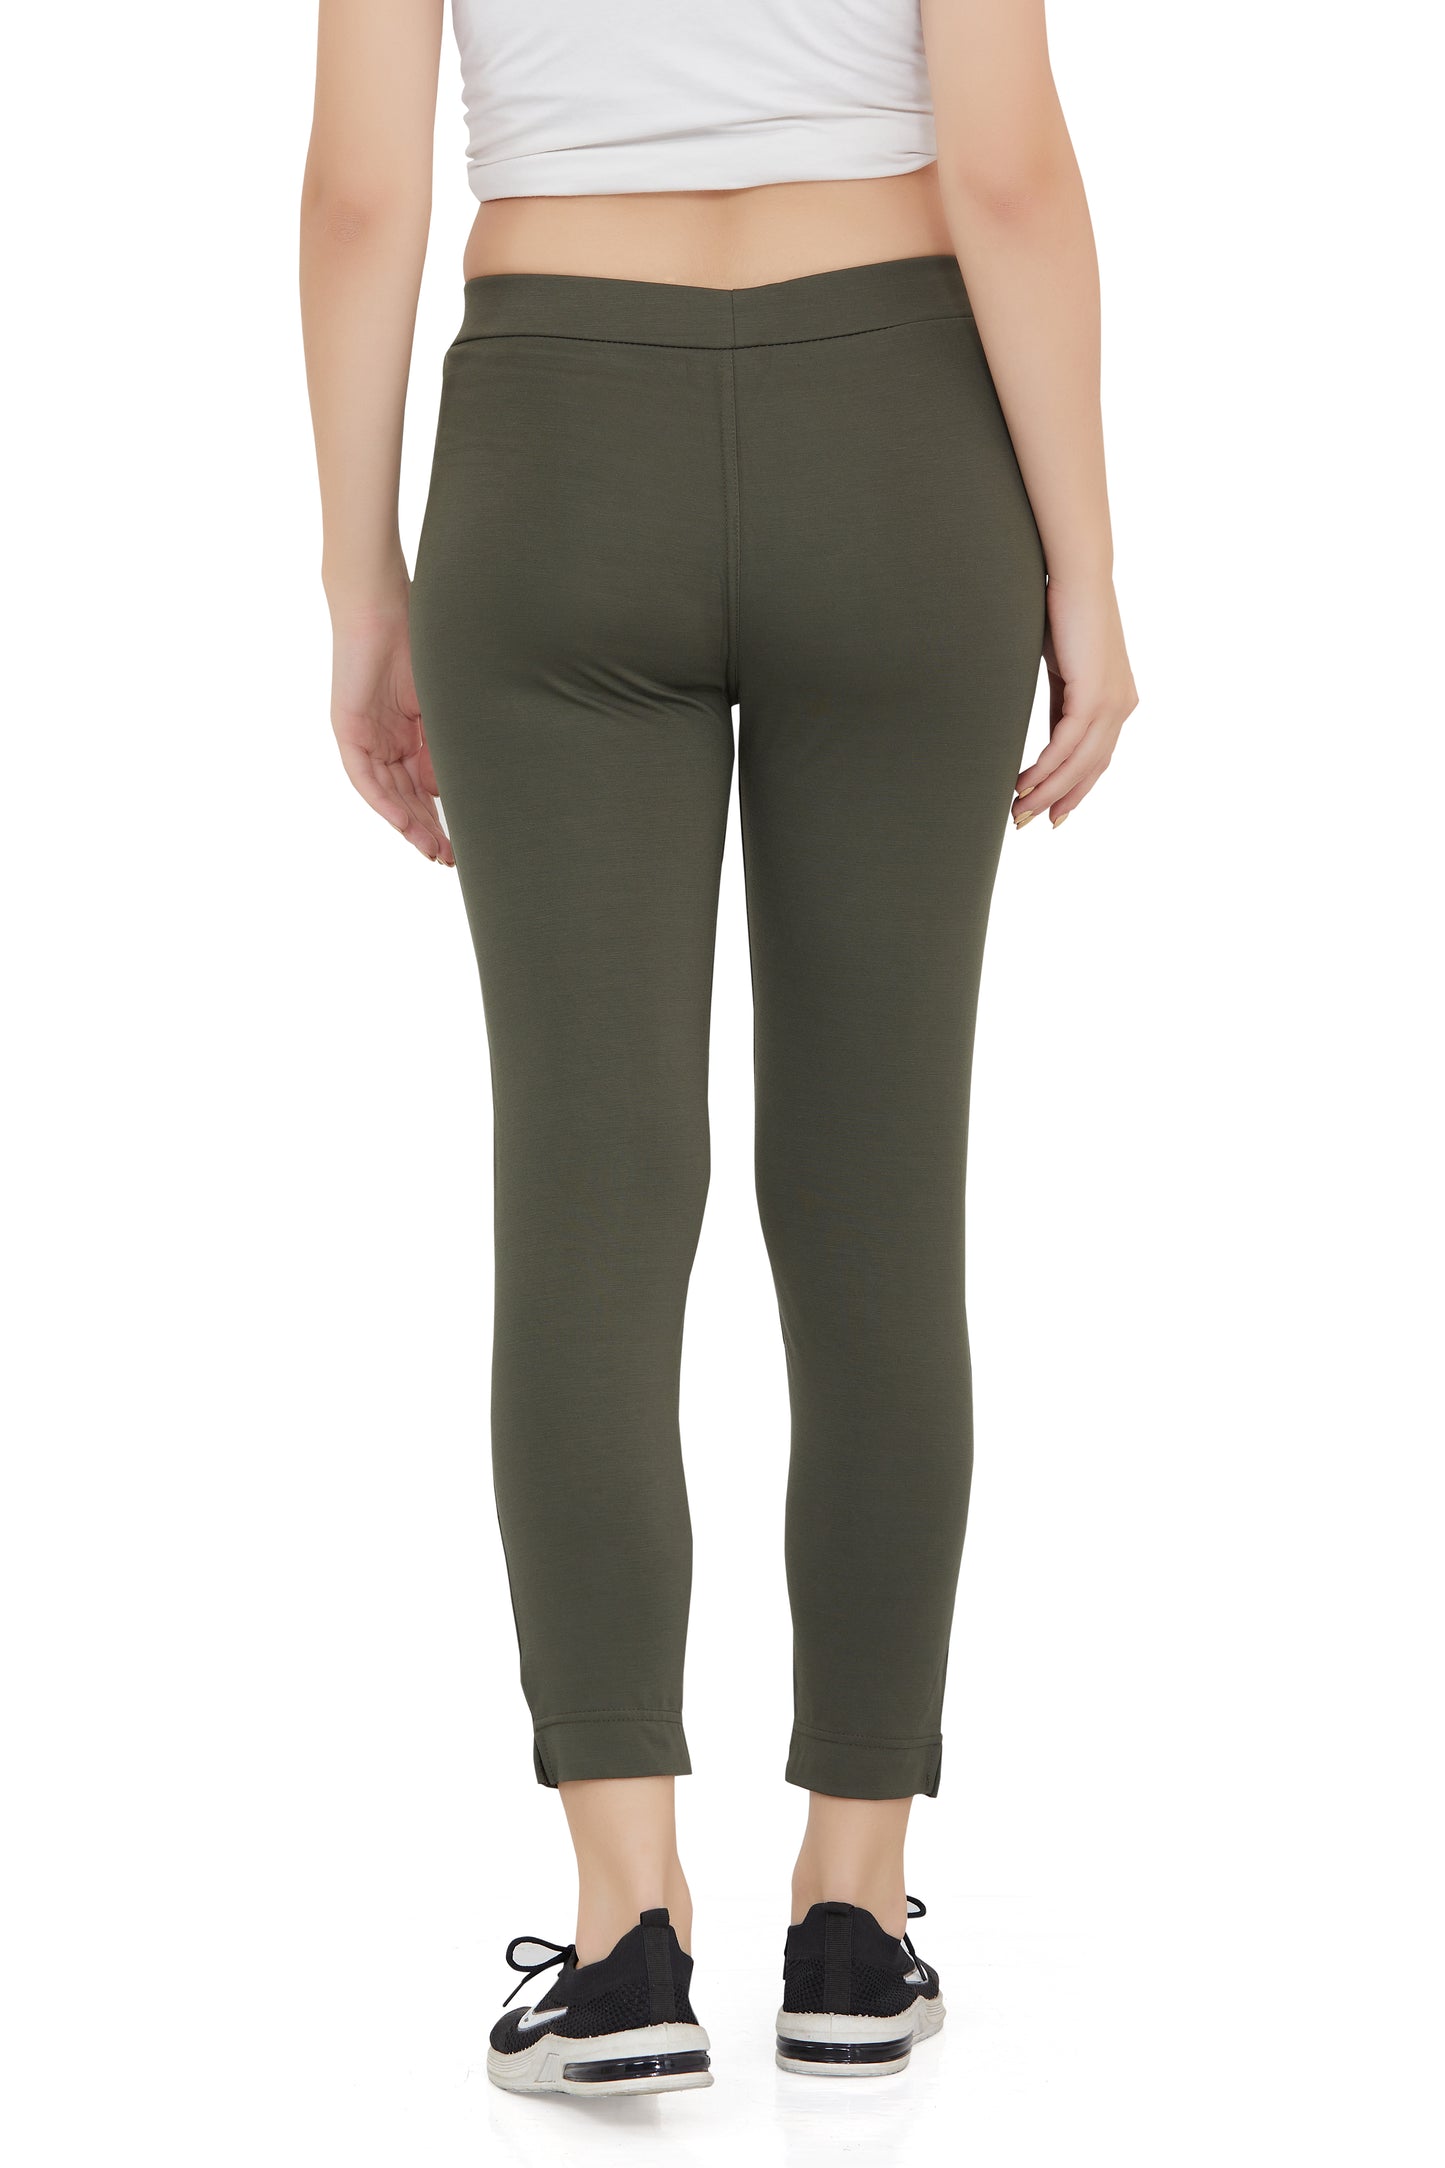 IMPORTED OLIVE STRATCHABLE PANTS